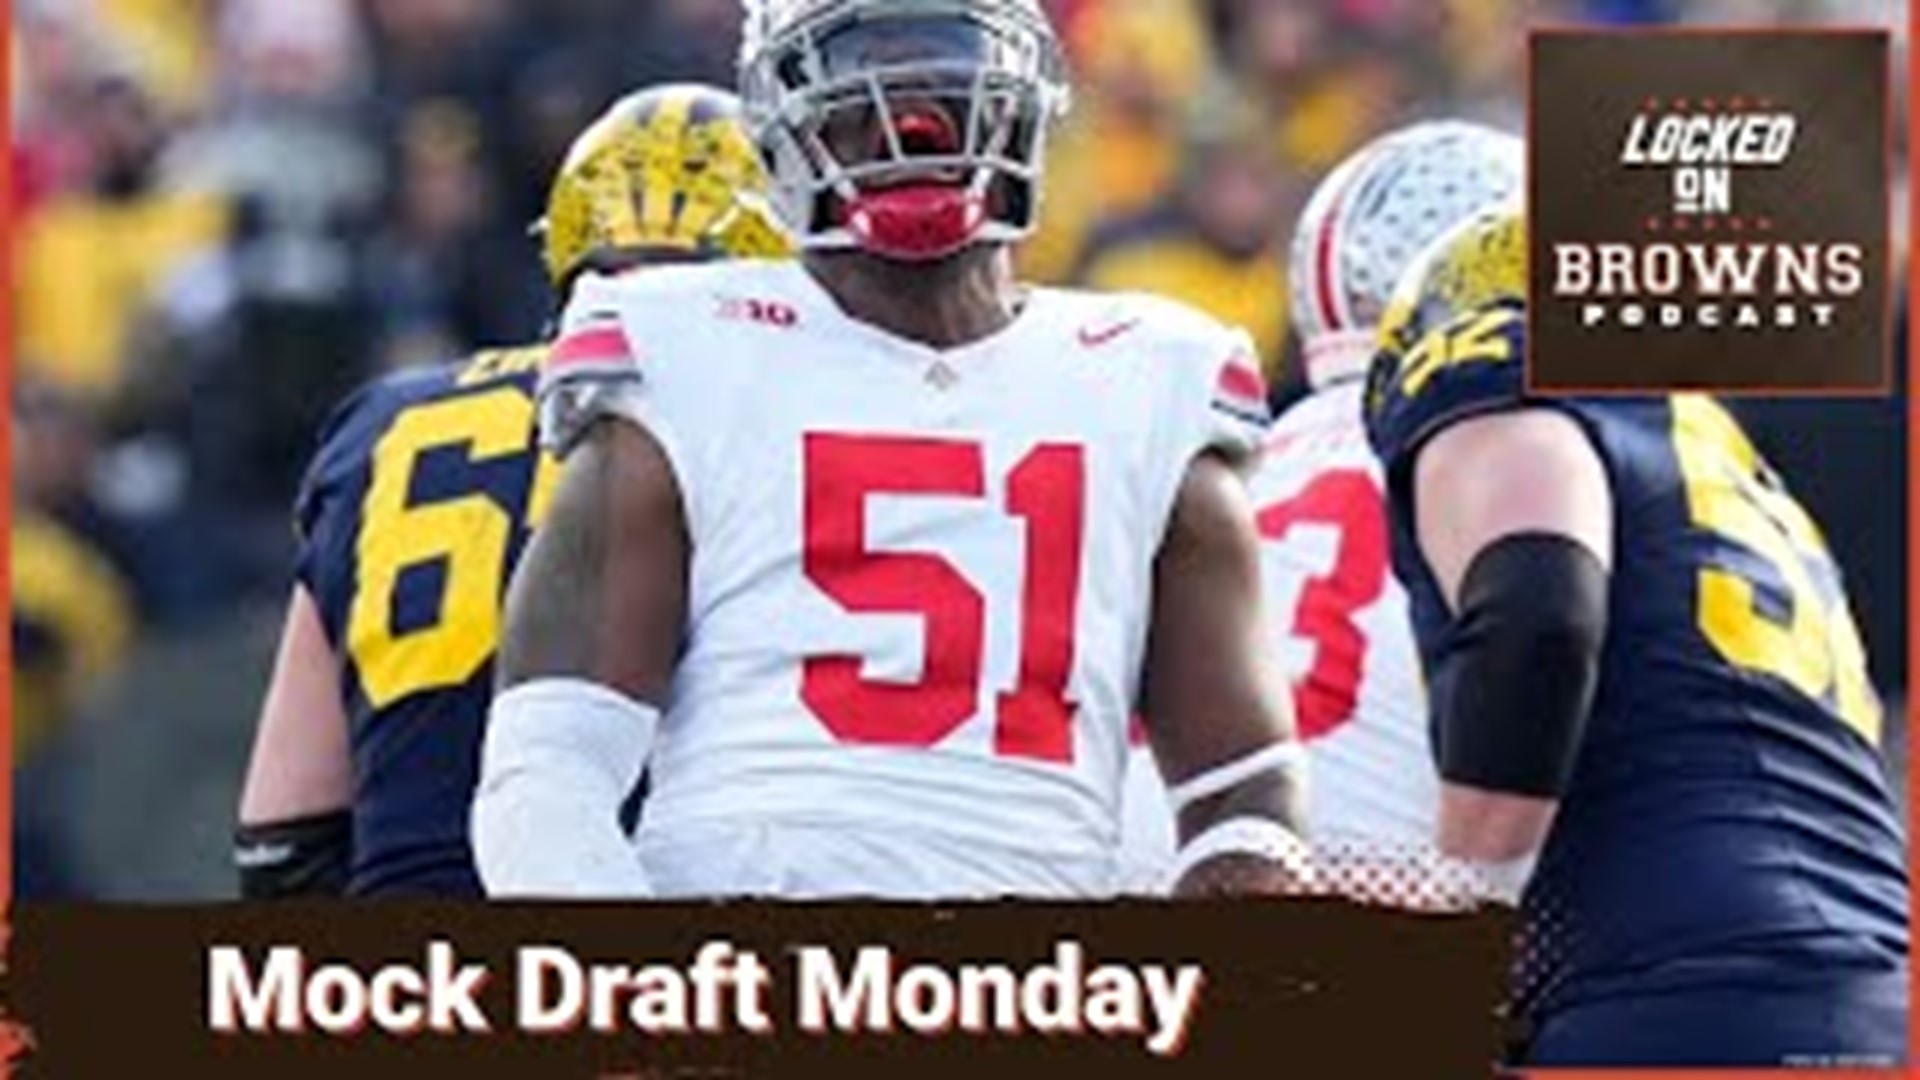 Cleveland Browns Mock Draft Monday, going through the selections and why they were made and trying to figure out what positions general manager should target.